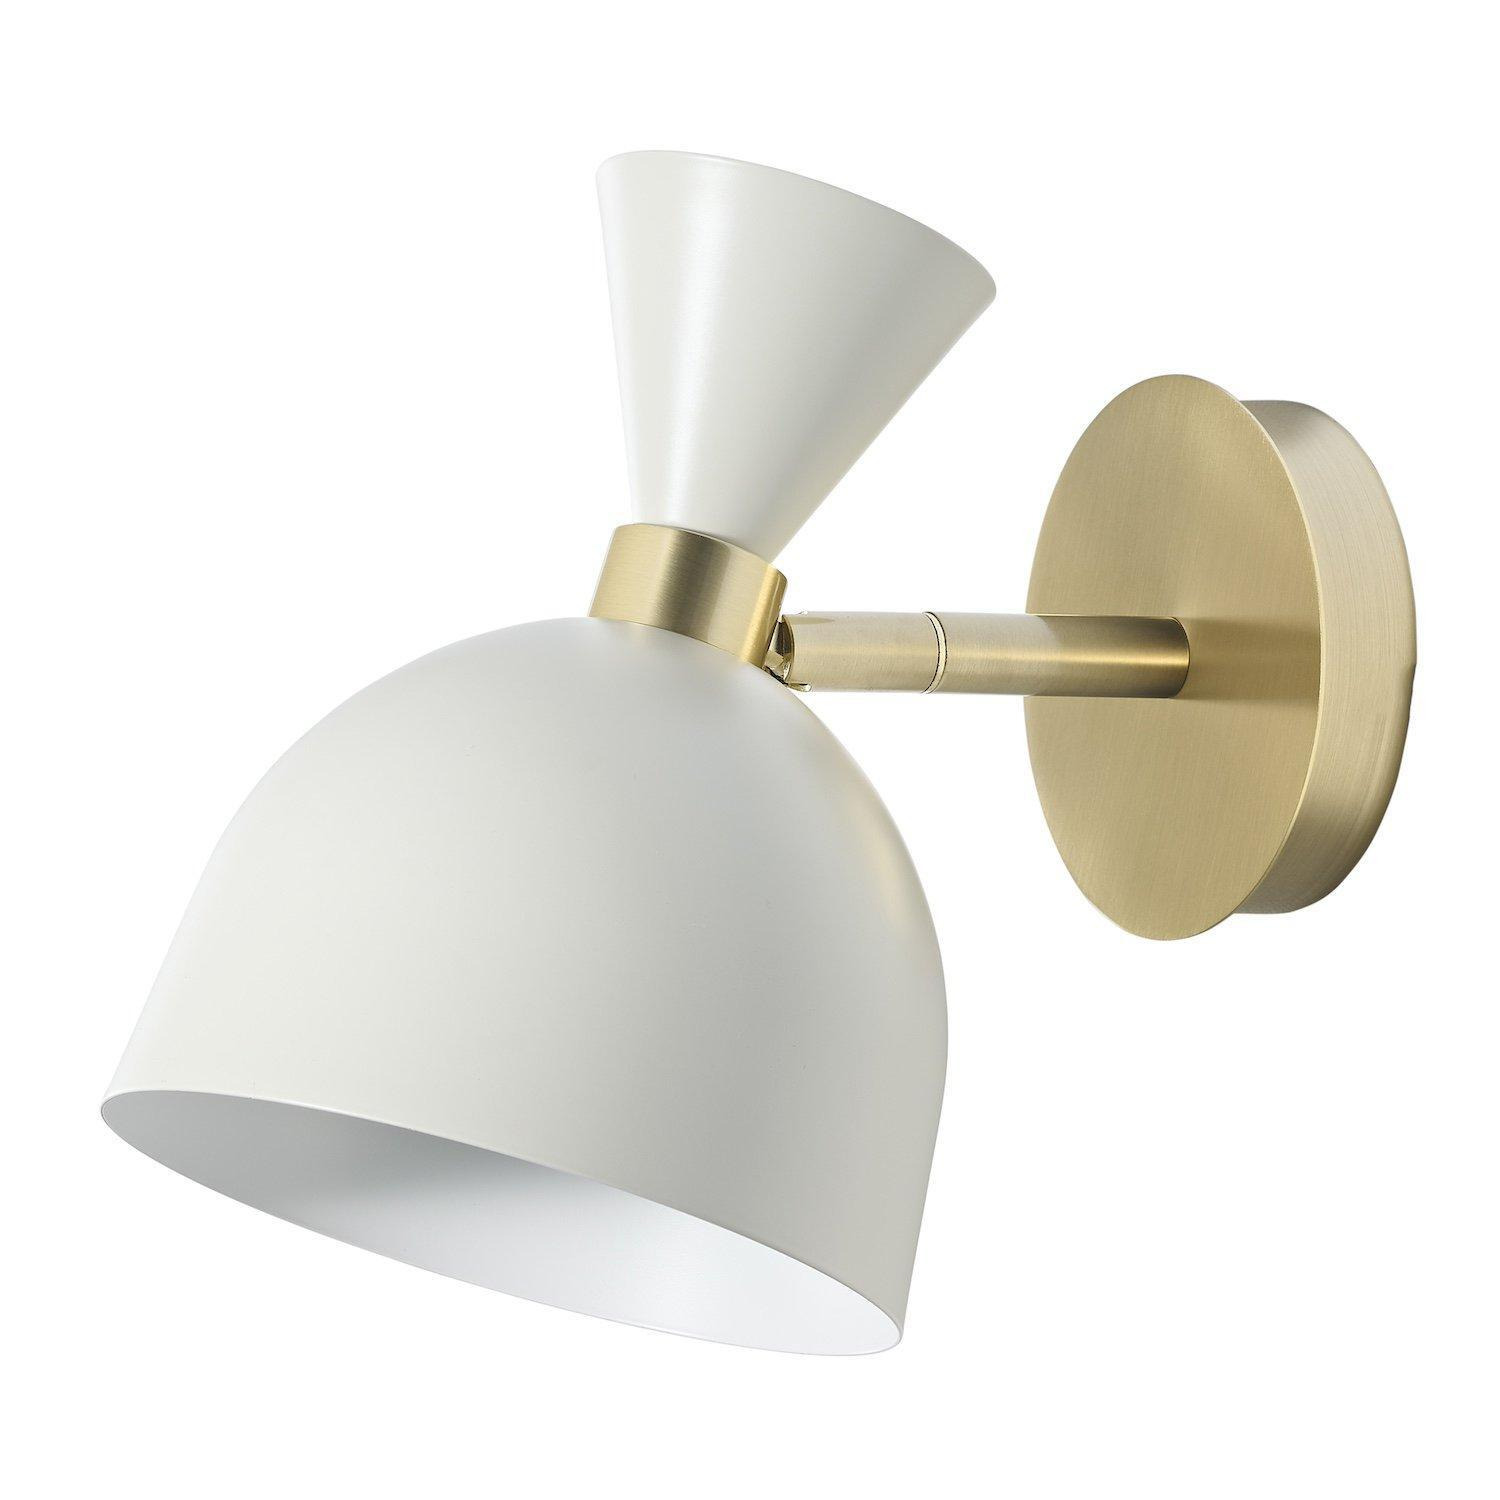 Modern Soft Cream and Brushed Gold Wall Lamp Fitting with Adjustable Spot Shade - image 1